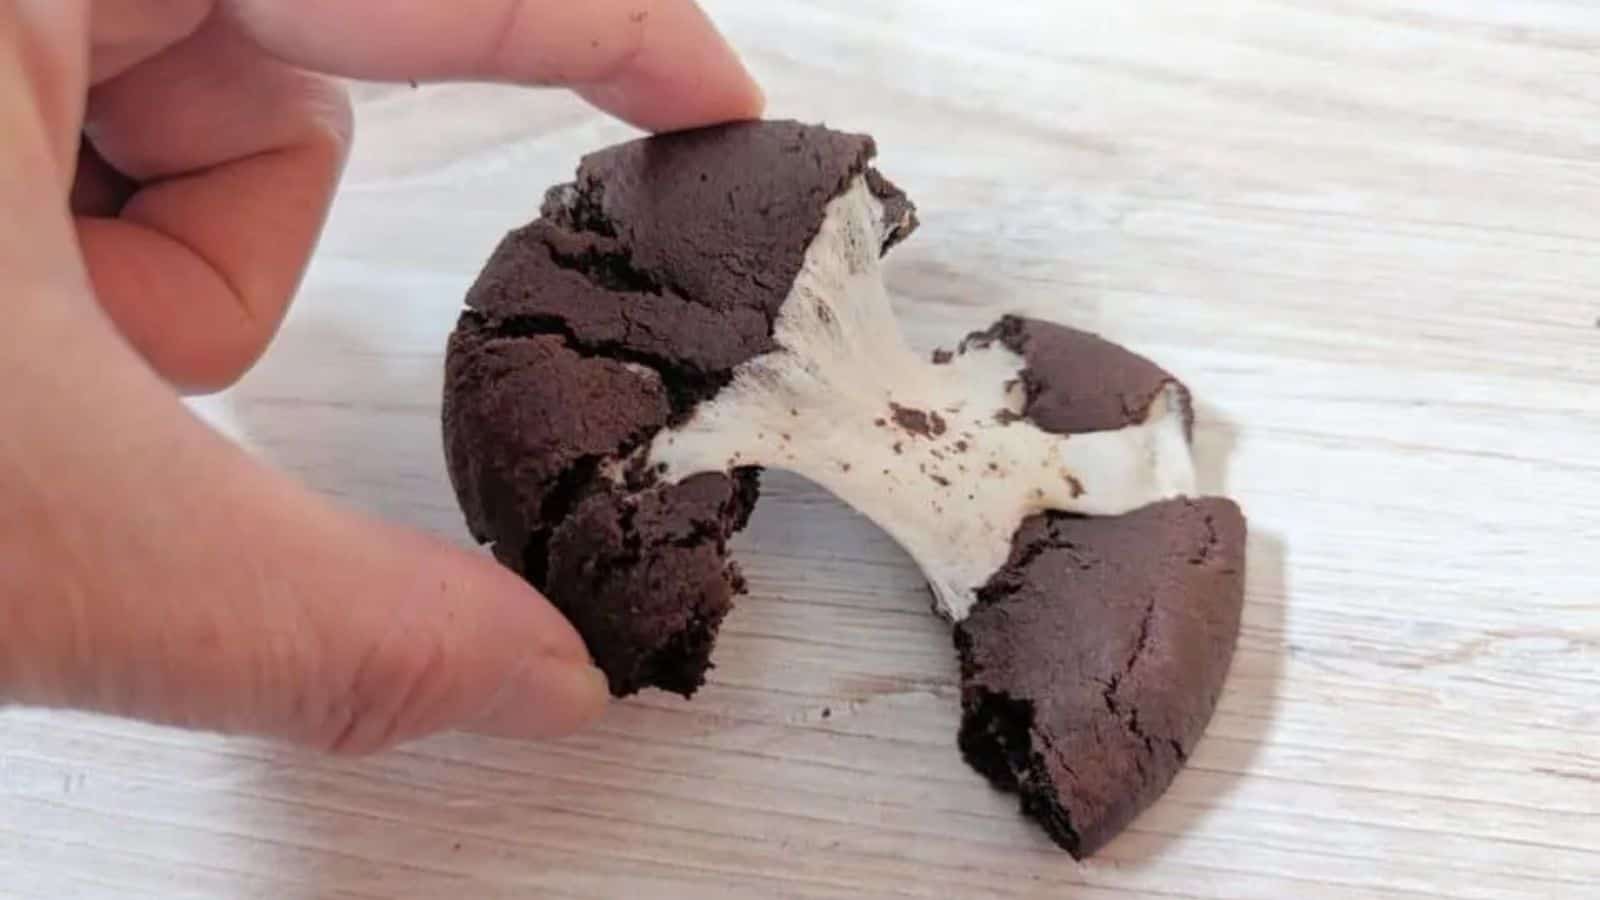 Image shows a Chocolate Marshmallow Cookie being pulled apart on a wooden table.